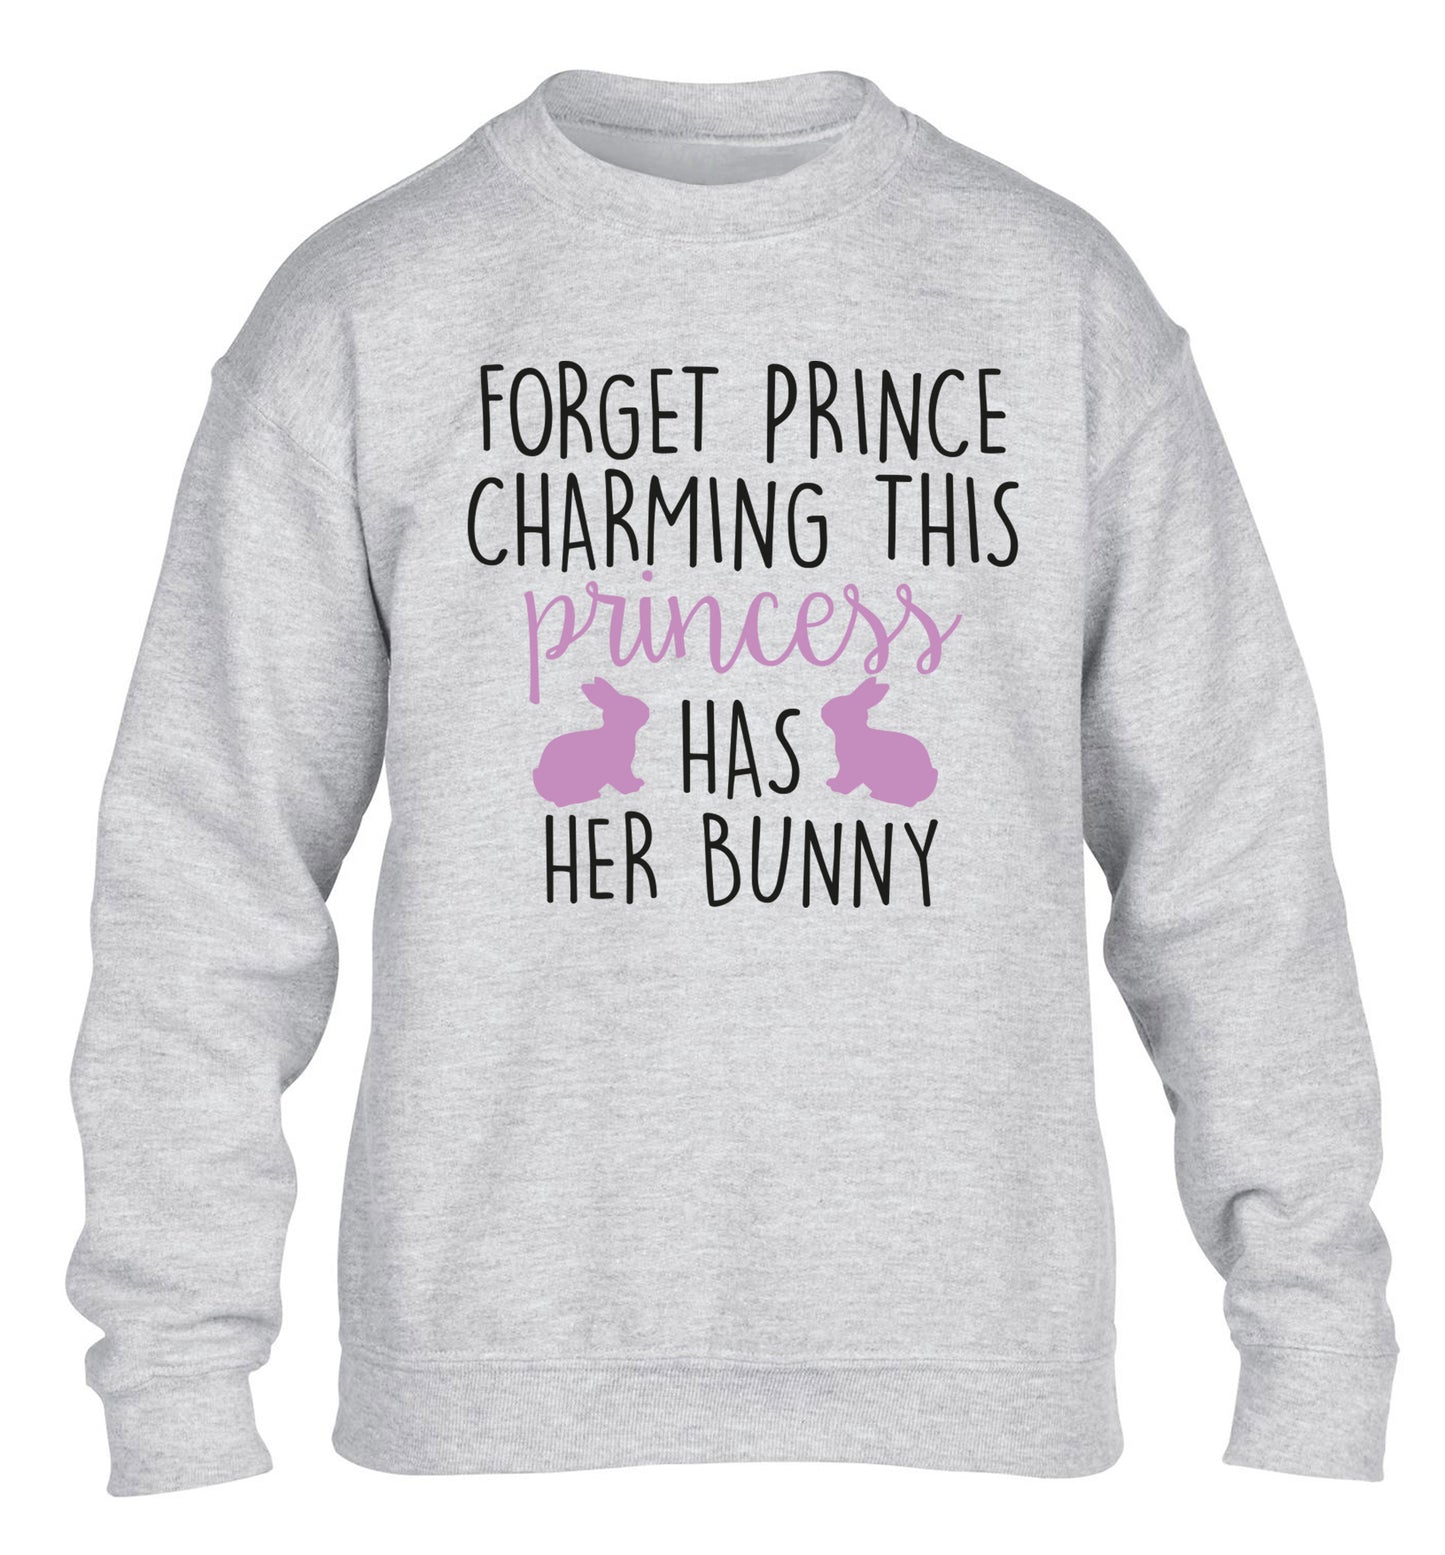 Forget prince charming this princess has her bunny children's grey  sweater 12-14 Years